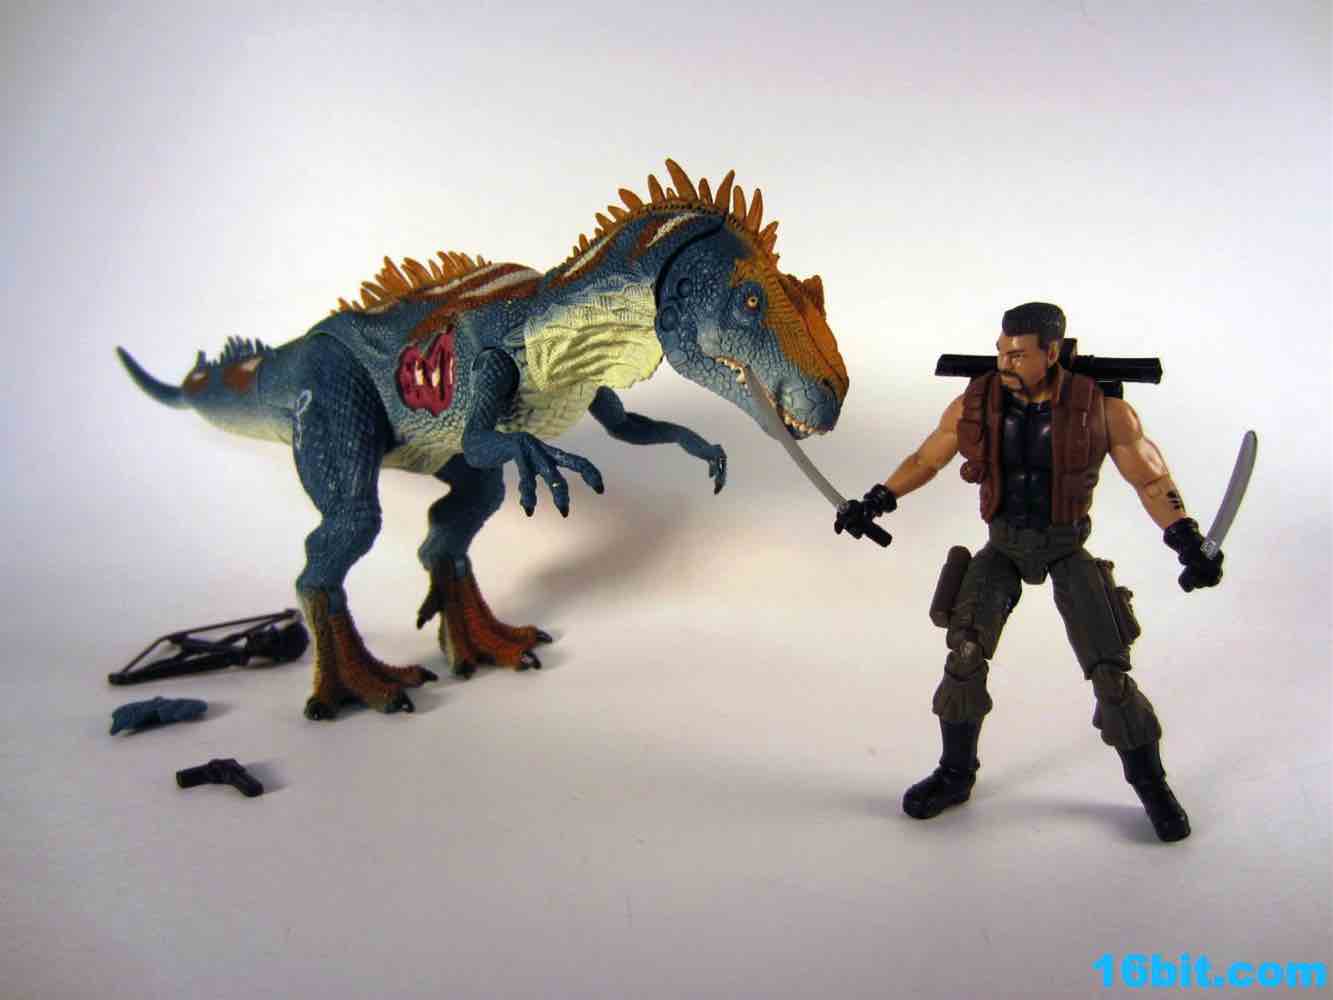 16bit.com Figure of the Day Review: Hasbro Jurassic Park